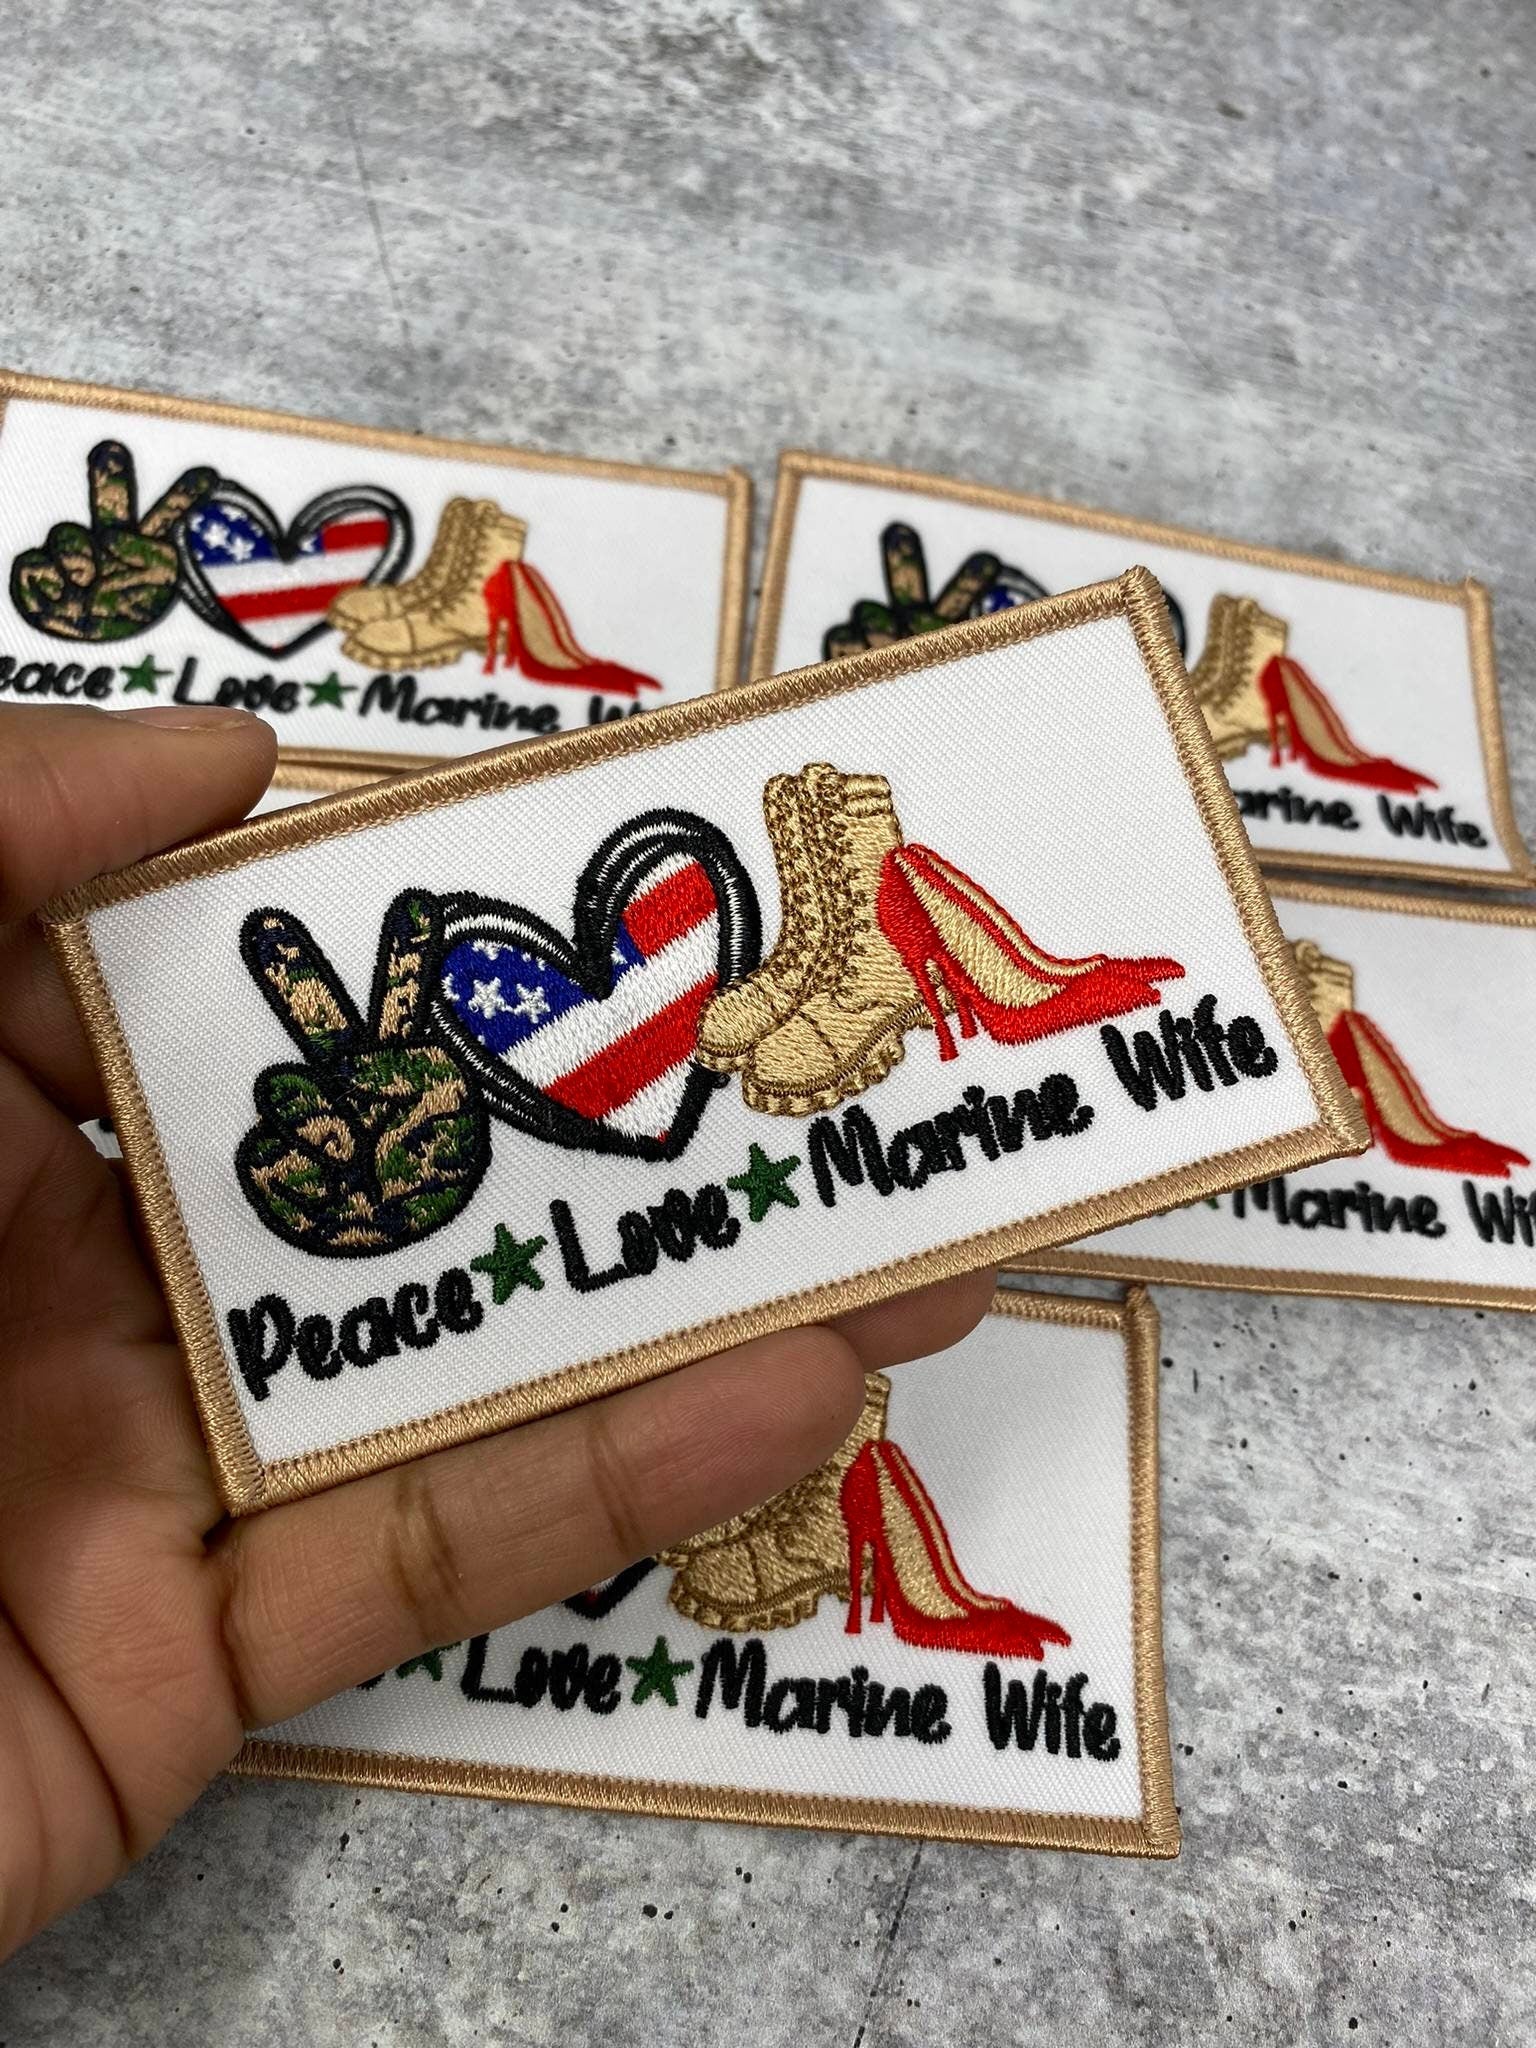 New, 1-pc, "Peace. Love. MARINE Wife" Iron-on Embroidery Patch, Size 3"x 2", Military Wife Badge, Patch for Crocs, Jackets, & DIY Craft